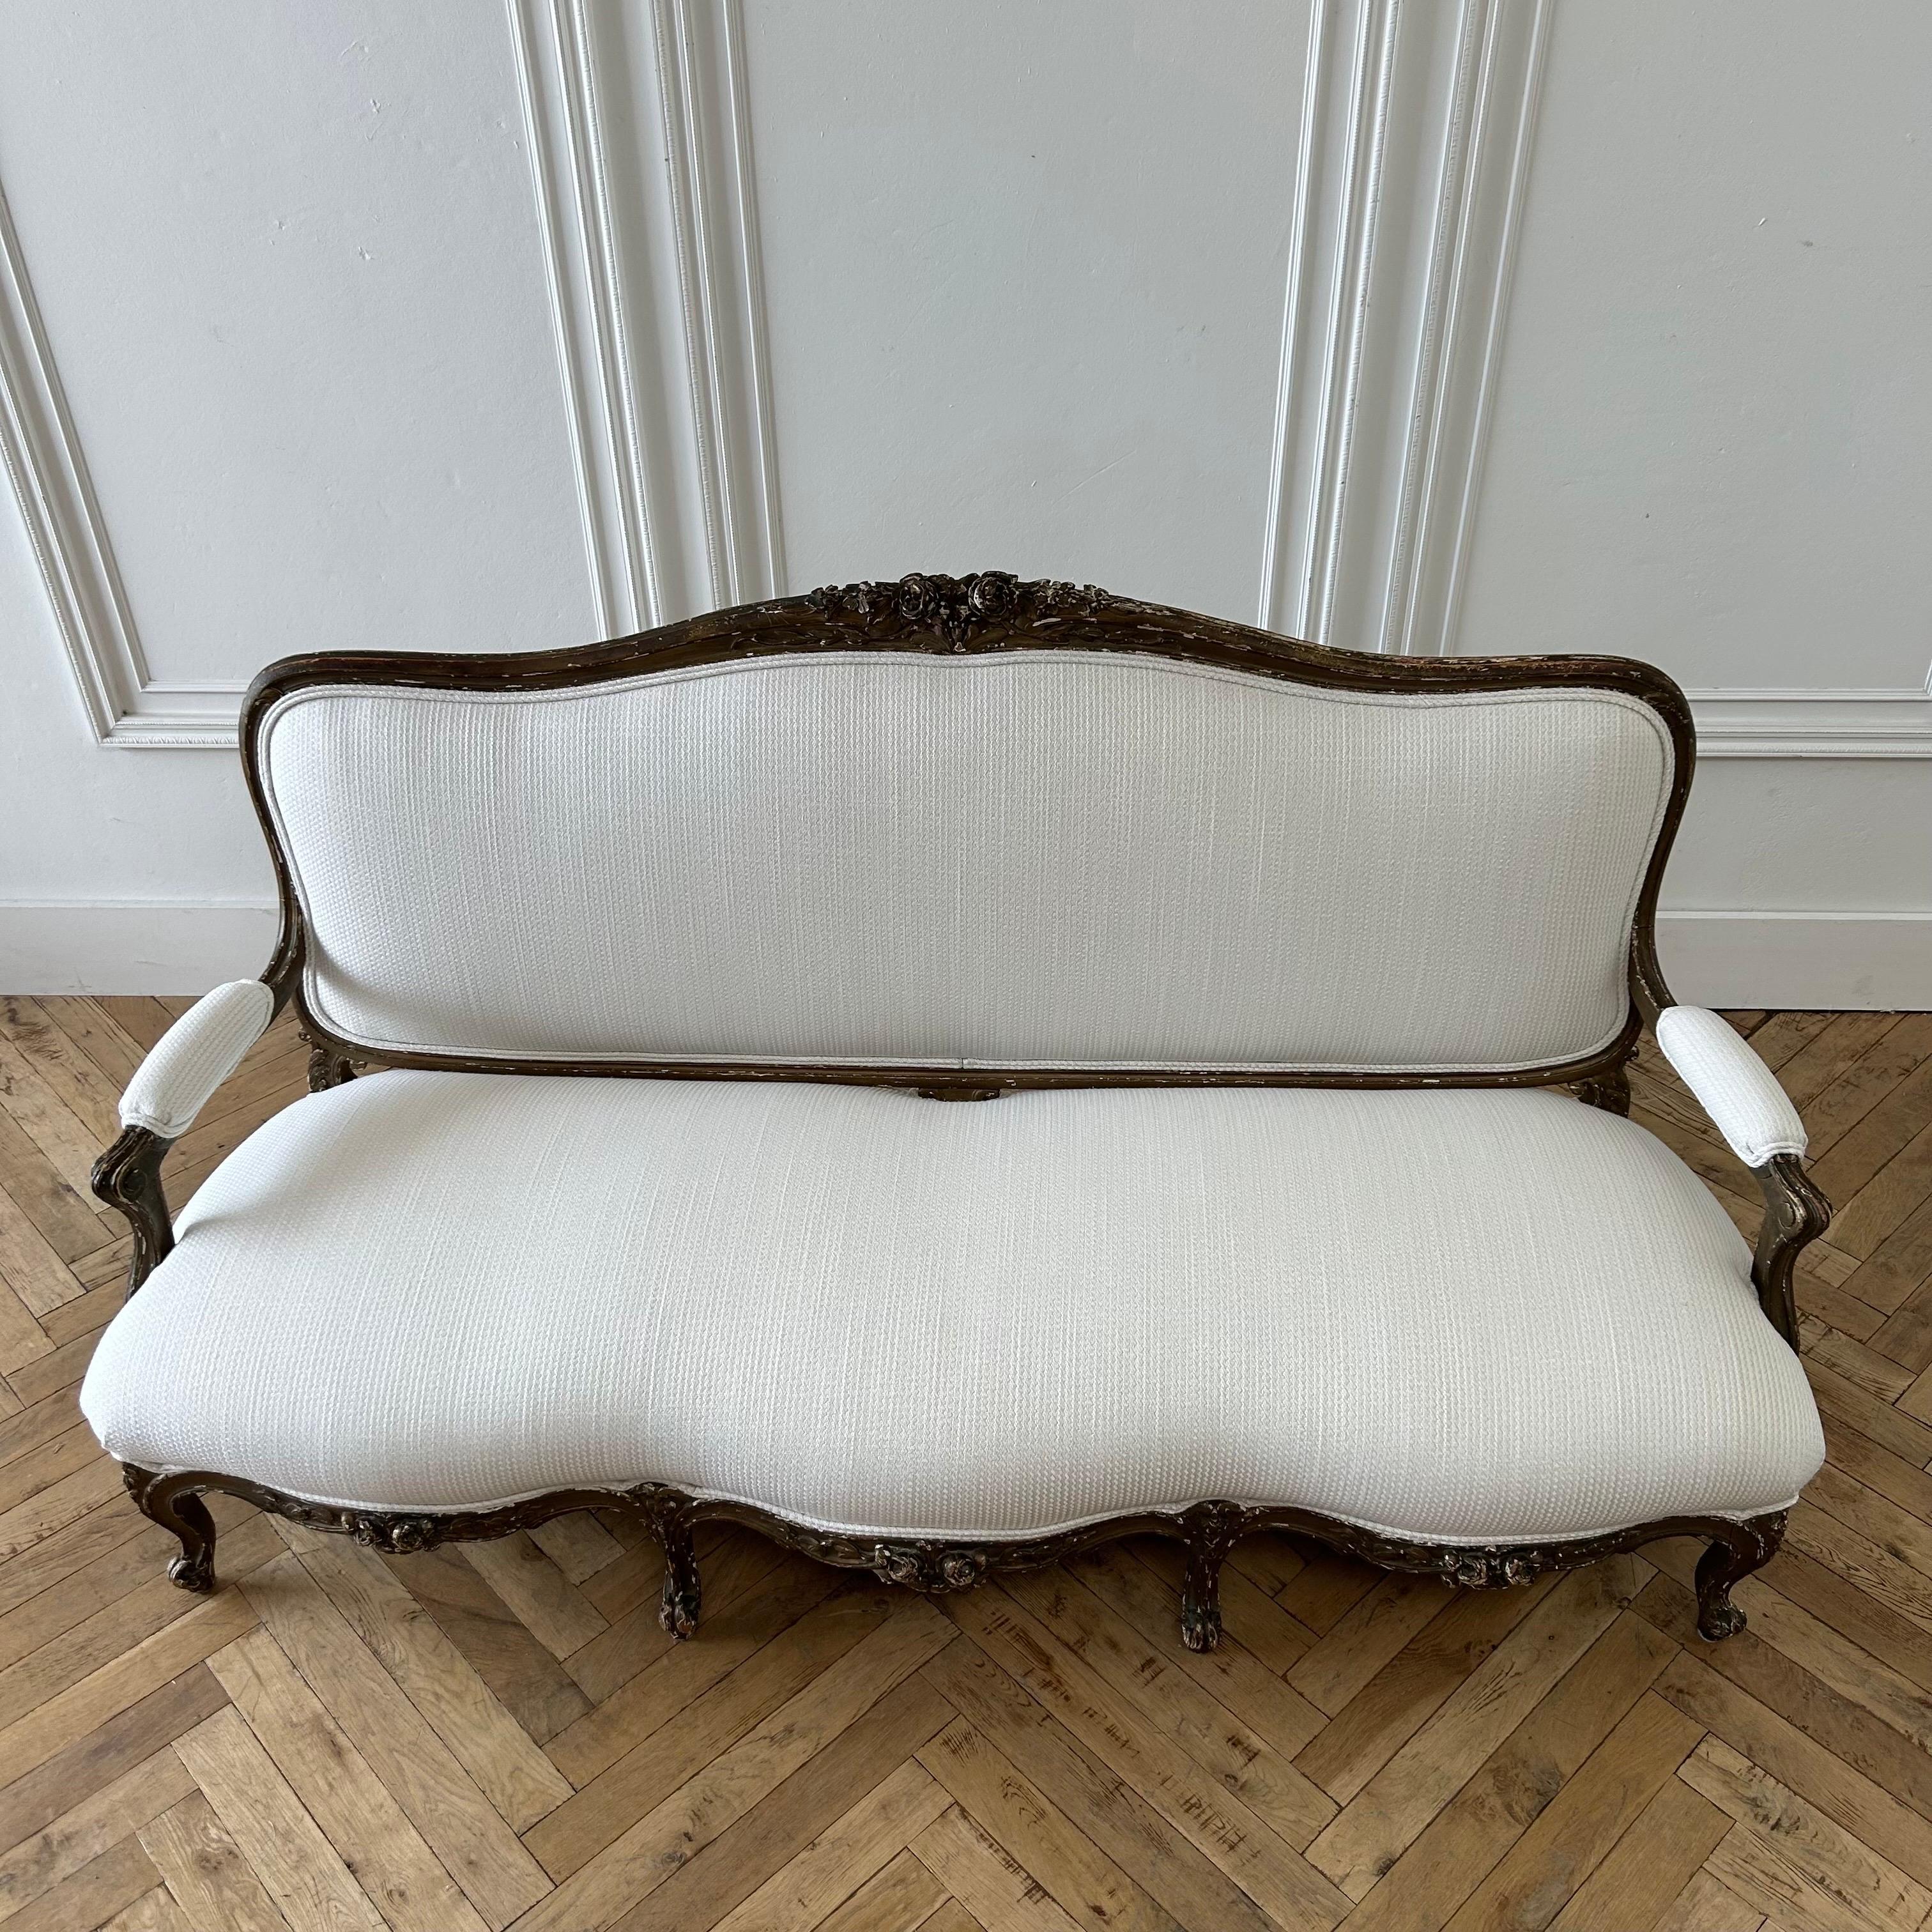 Antique French Gilt Wood Settee Upholstered in Antique White Wool and Cashmere For Sale 2